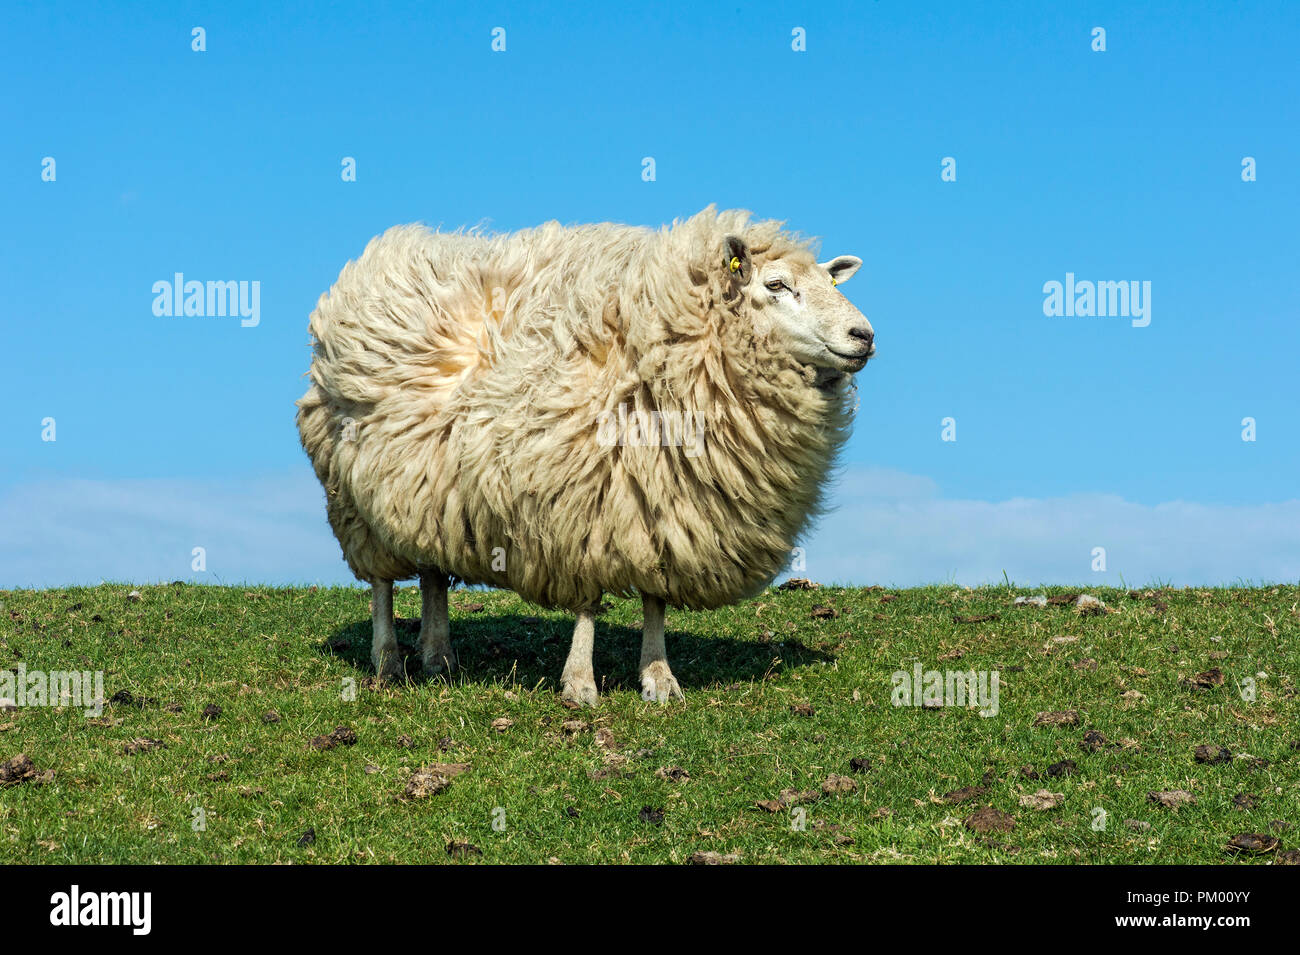 Texel sheep against blue sky, marshland at the North Sea coast, Schleswig-Holstein, Germany Stock Photo